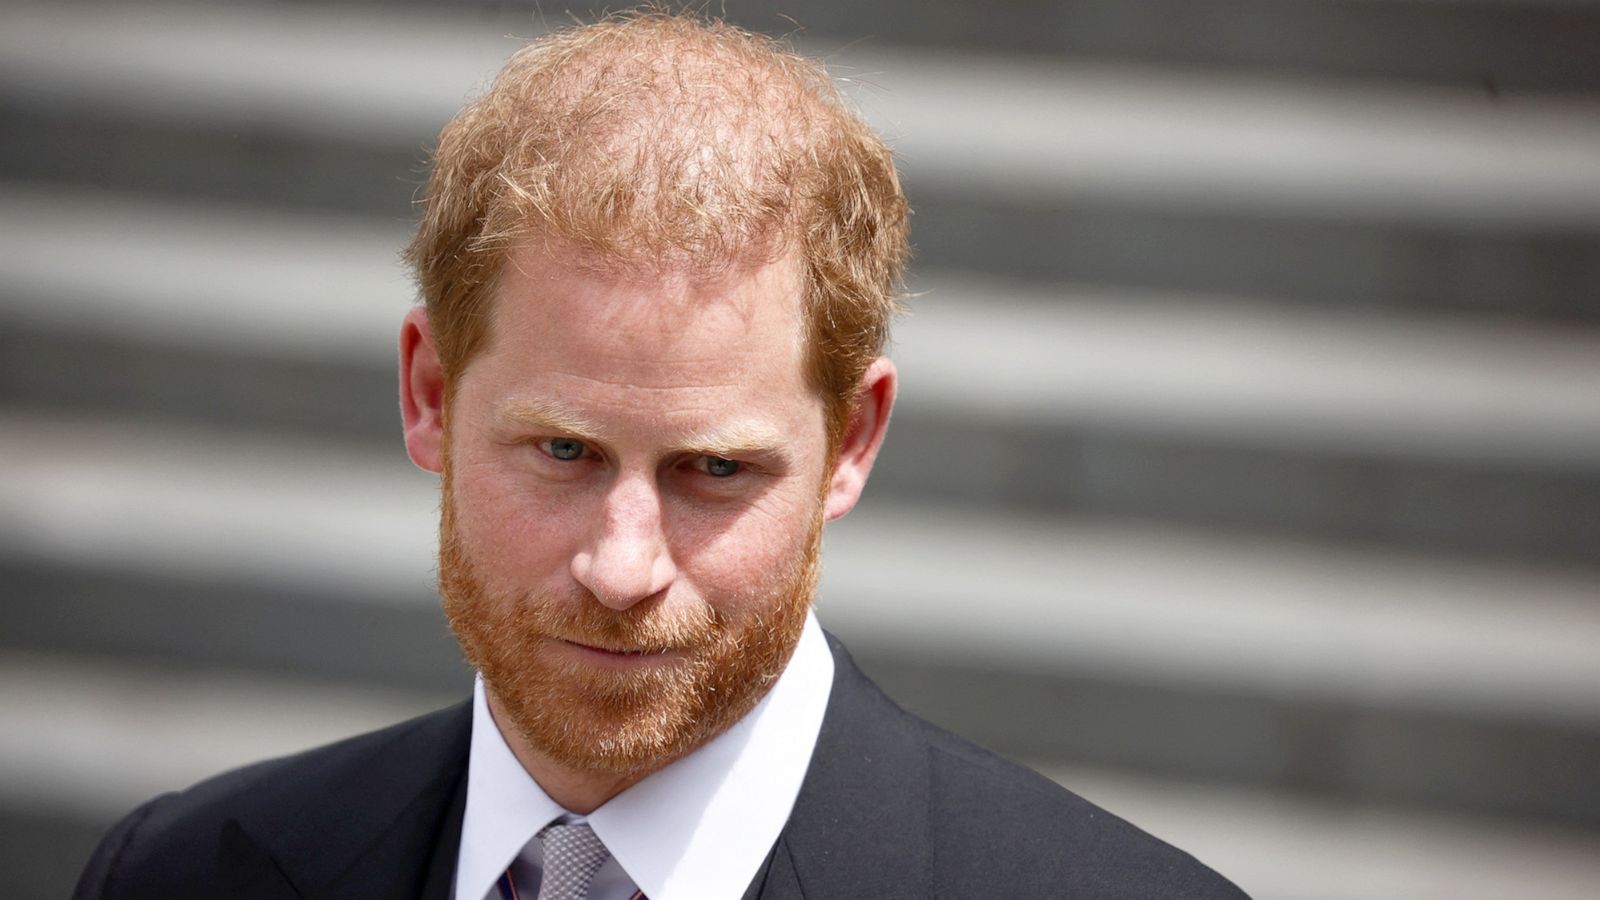 PHOTO: Prince Harry departs an event in London, June 3, 2022.